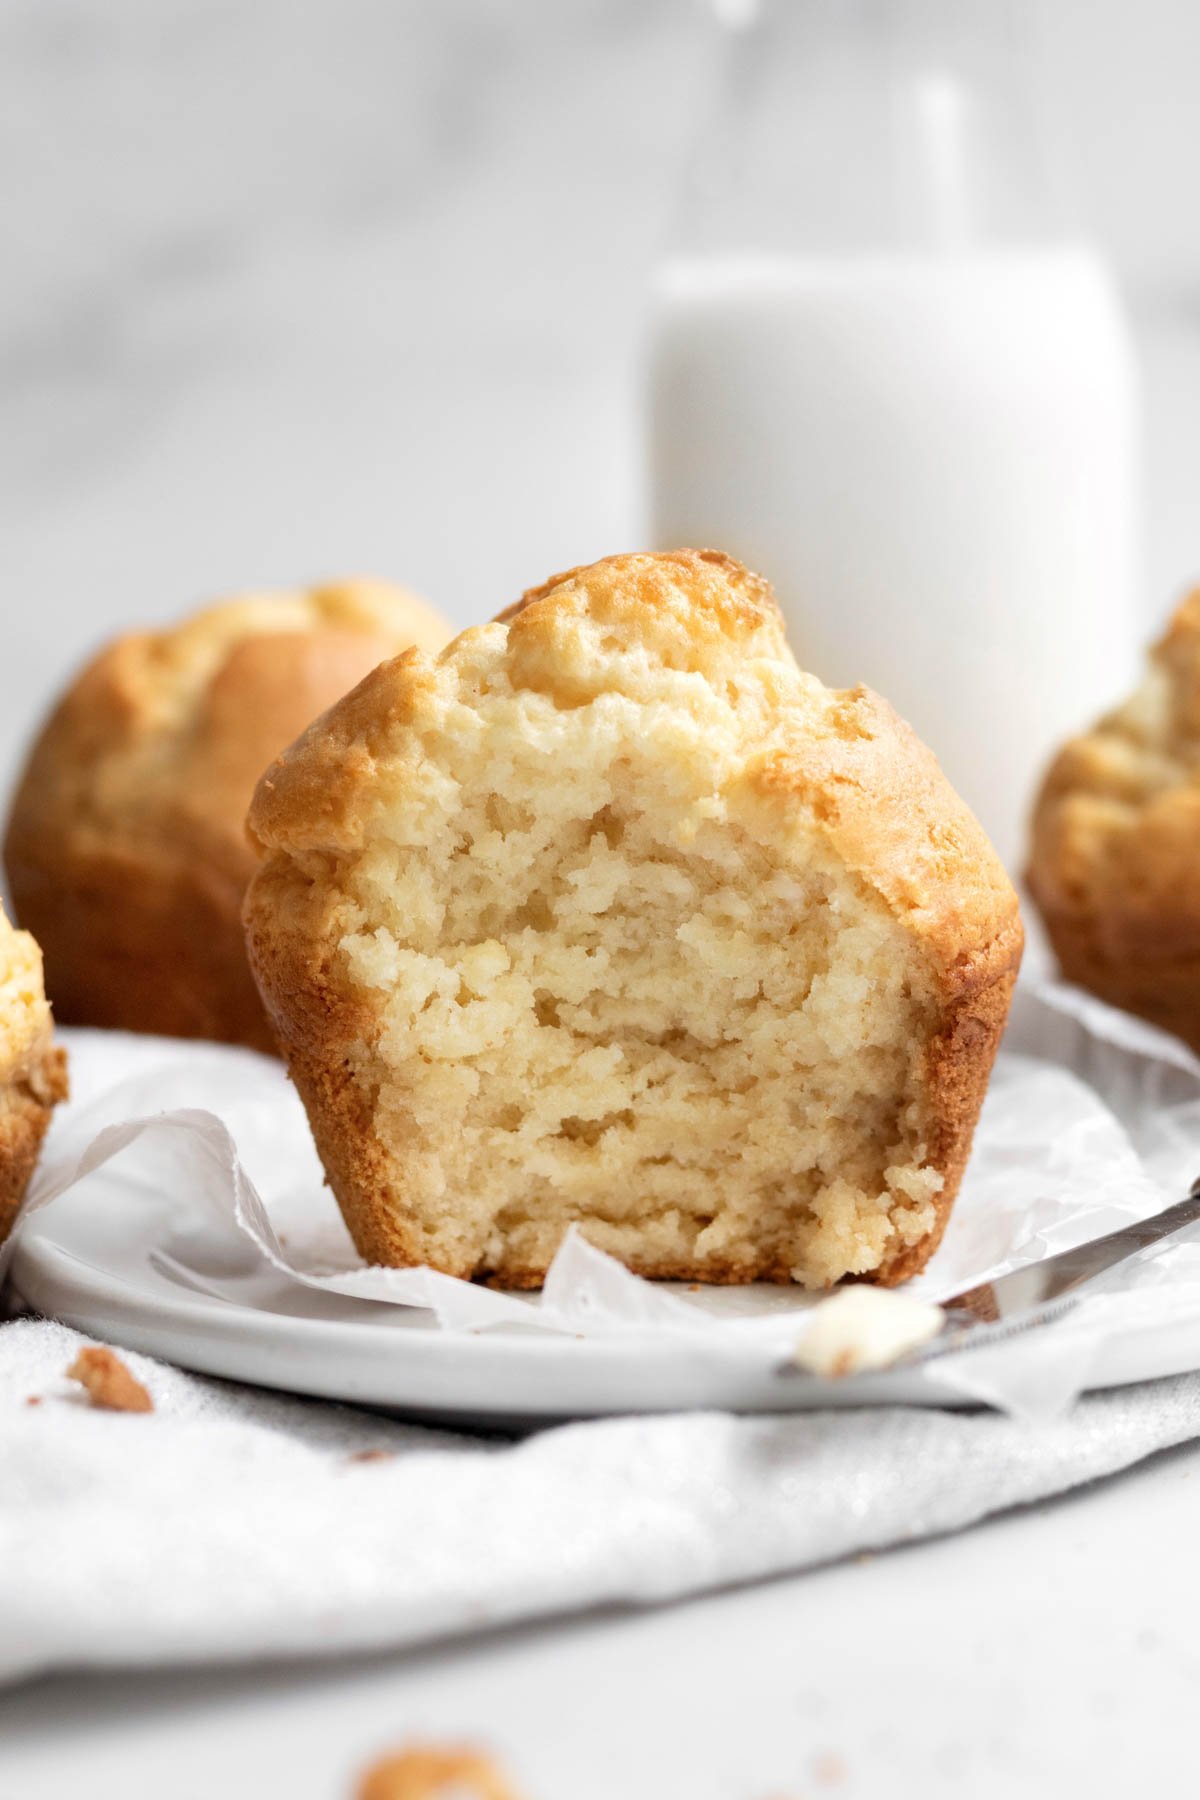 A perfect bite reveals the tender moist lightly colored crumb of the Vanilla Muffin.